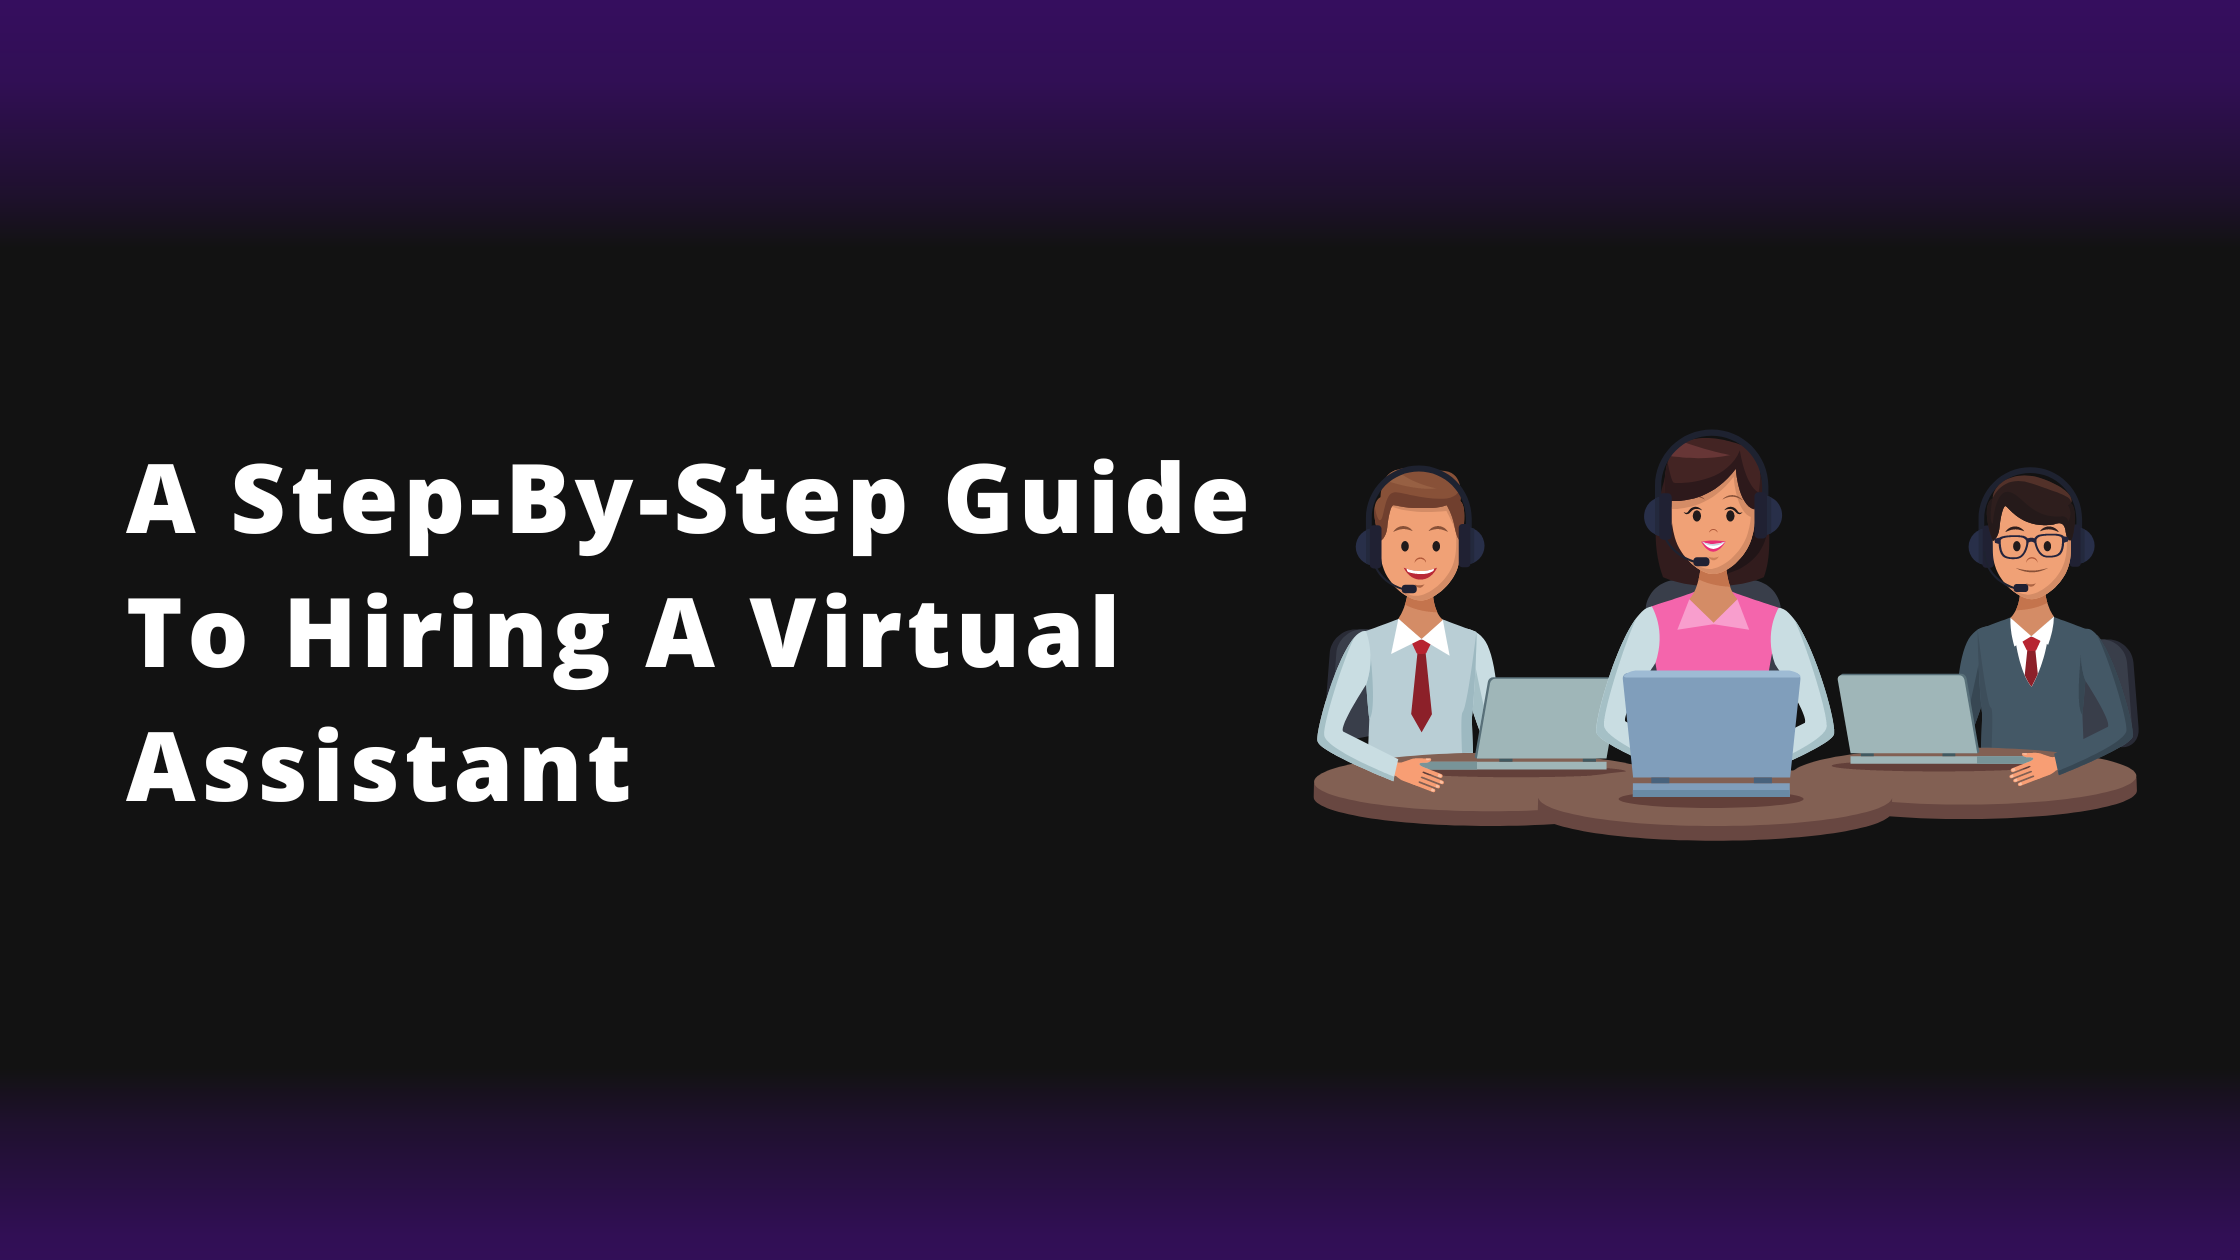 Step-by-step guide to hiring a Virtual Assistant